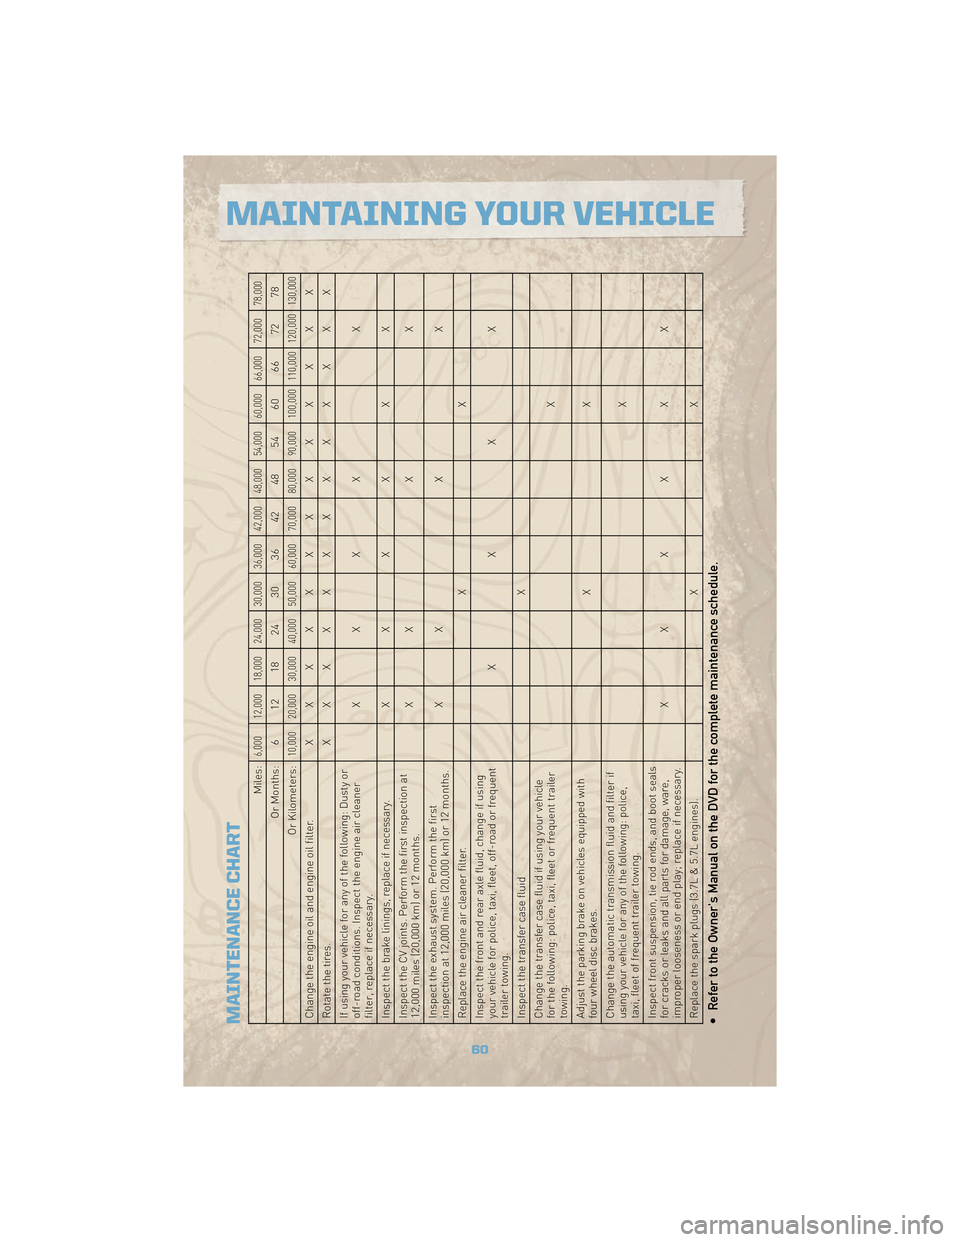 JEEP COMMANDER 2010 1.G User Guide MAINTENANCE CHART
Miles:
6,000 12,000 18,000 24,000 30,000 36,000 42,000 48,000 54,000 60,000 66,000 72,000 78,000
Or Months: 6 12 18 24 30 36 42 48 54 60 66 72 78
Or Kilometers:
10,000 20,000 30,000 